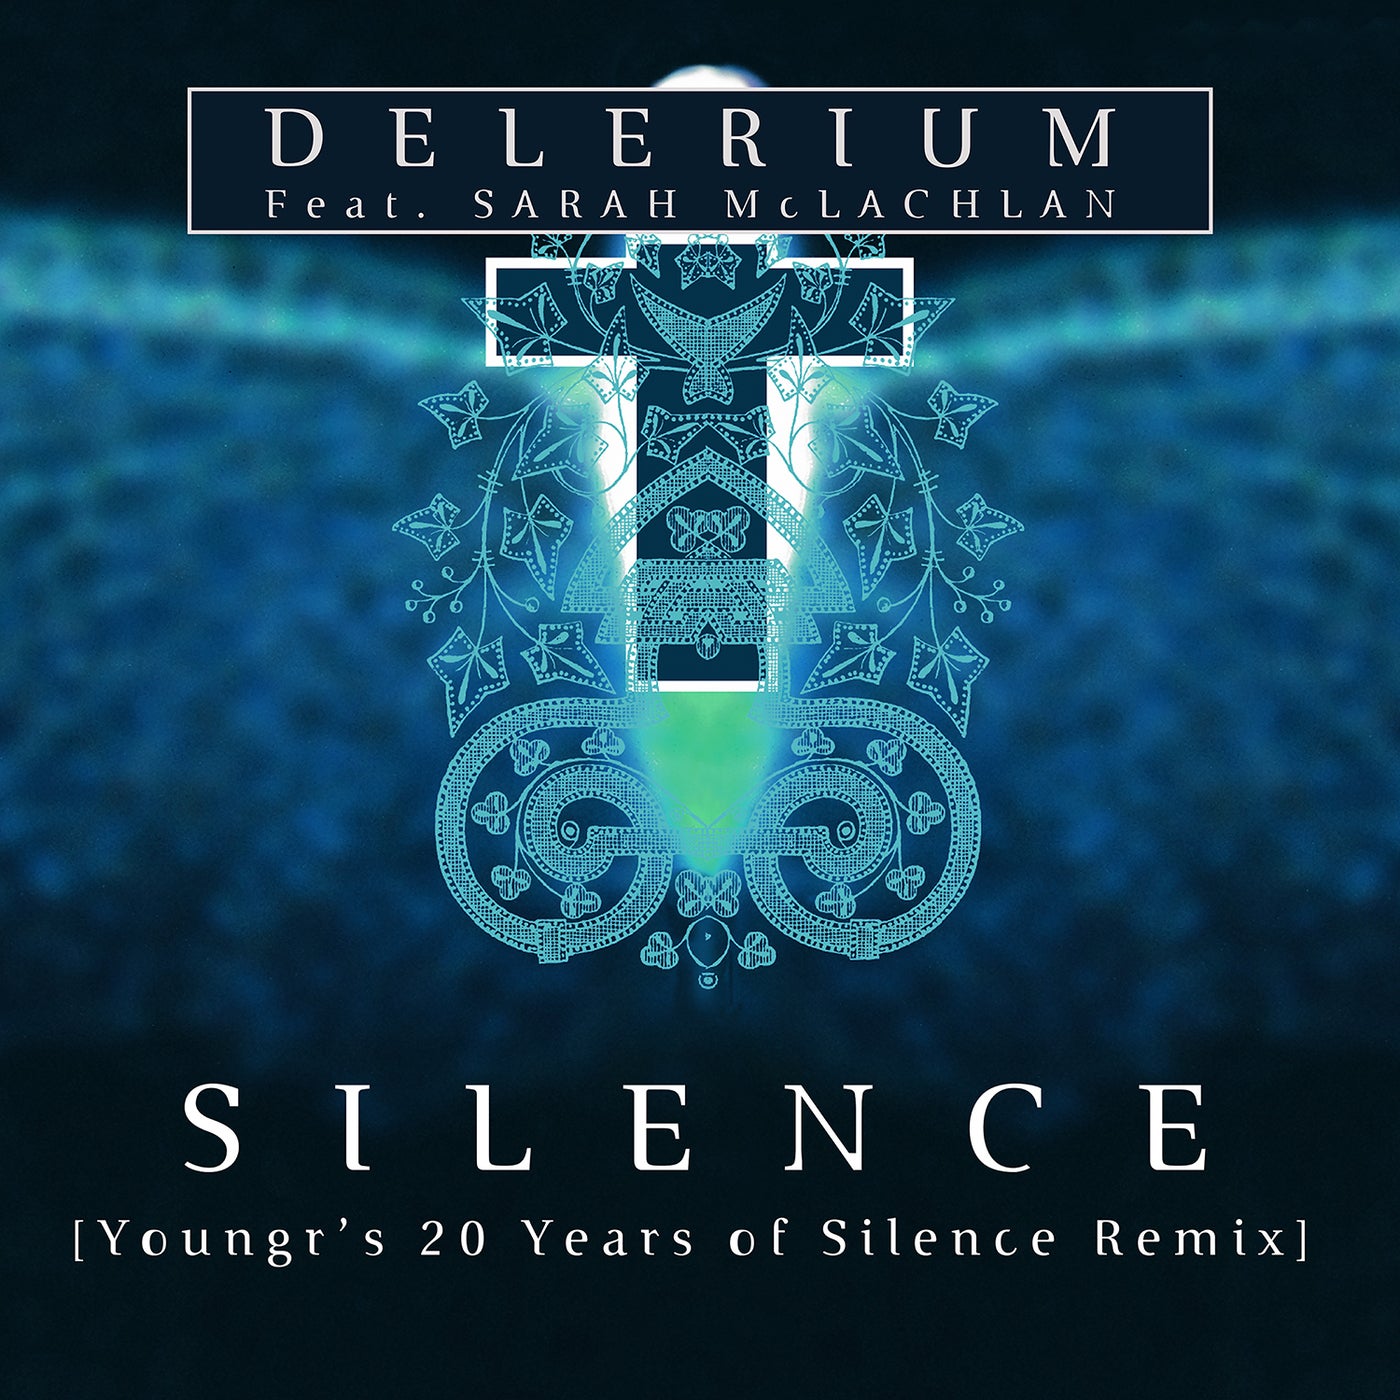 Silence - Youngr's 20 Years of Silence Remix